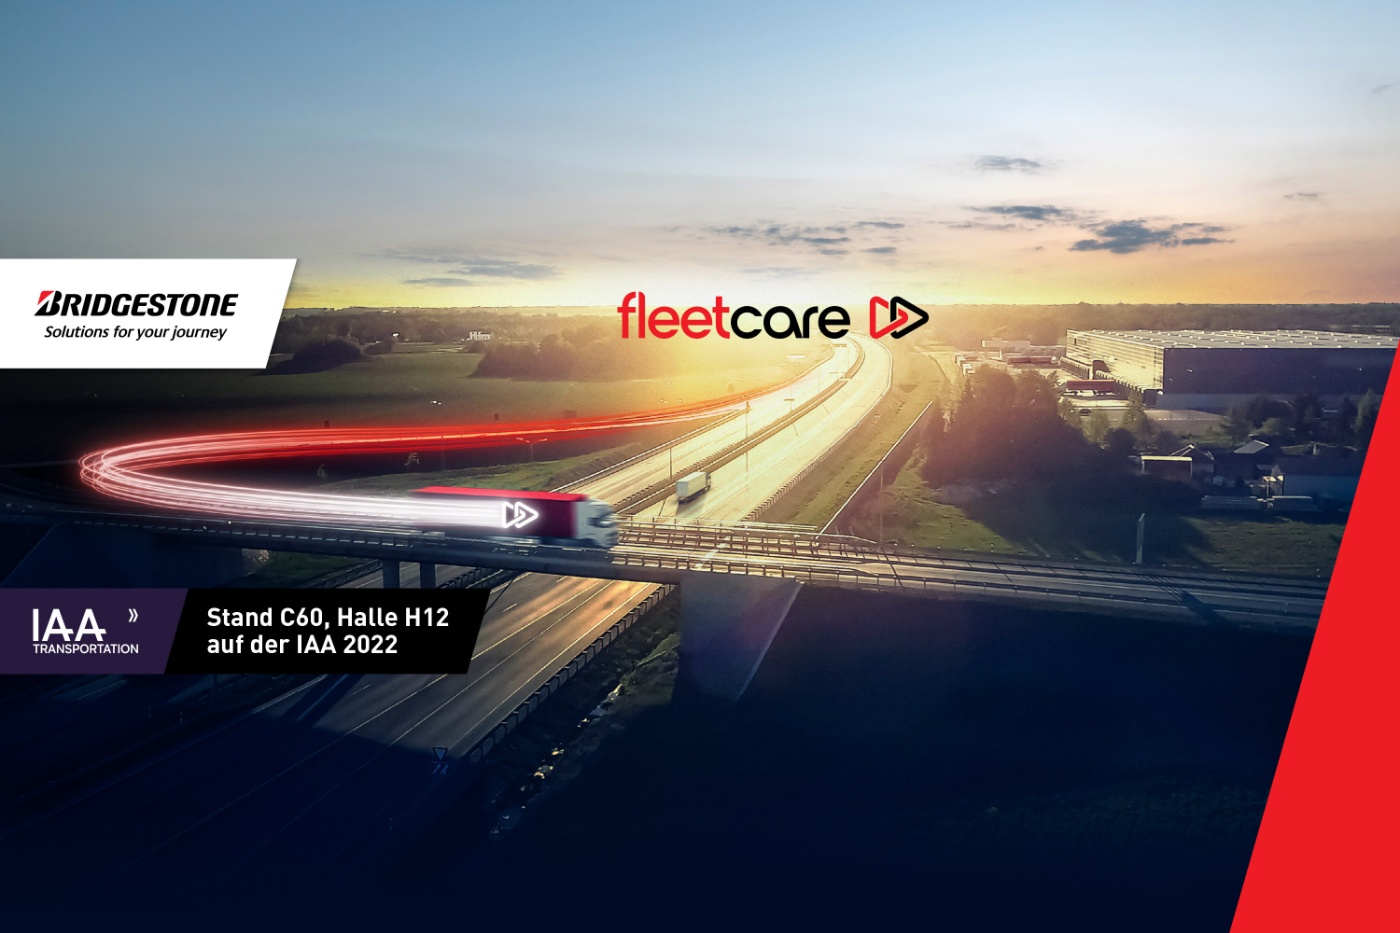 Webfleet aims to help reduce fuel consumption by up to 15 percent. Picture: Bridgestone